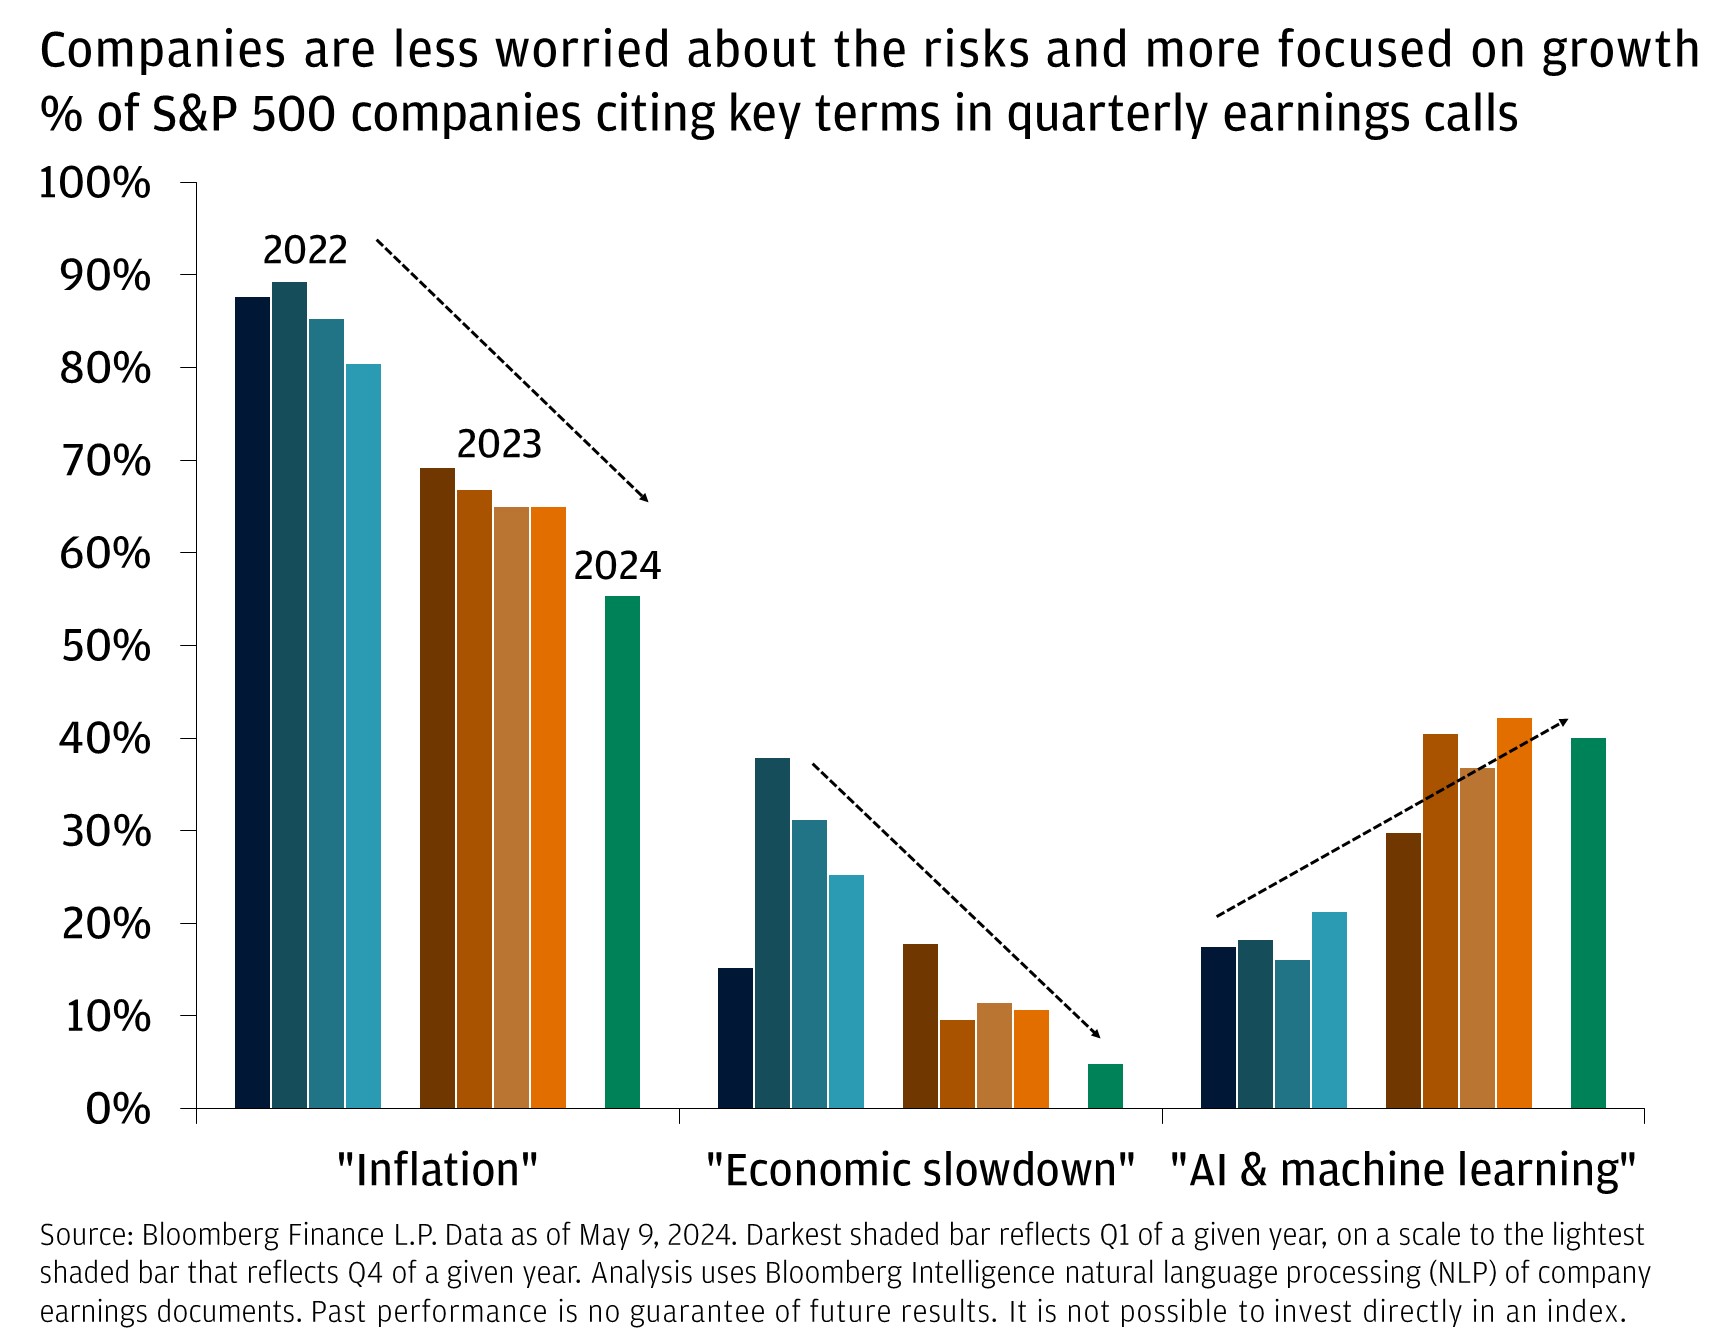 Companies are less worried about the risks and more focused on growth